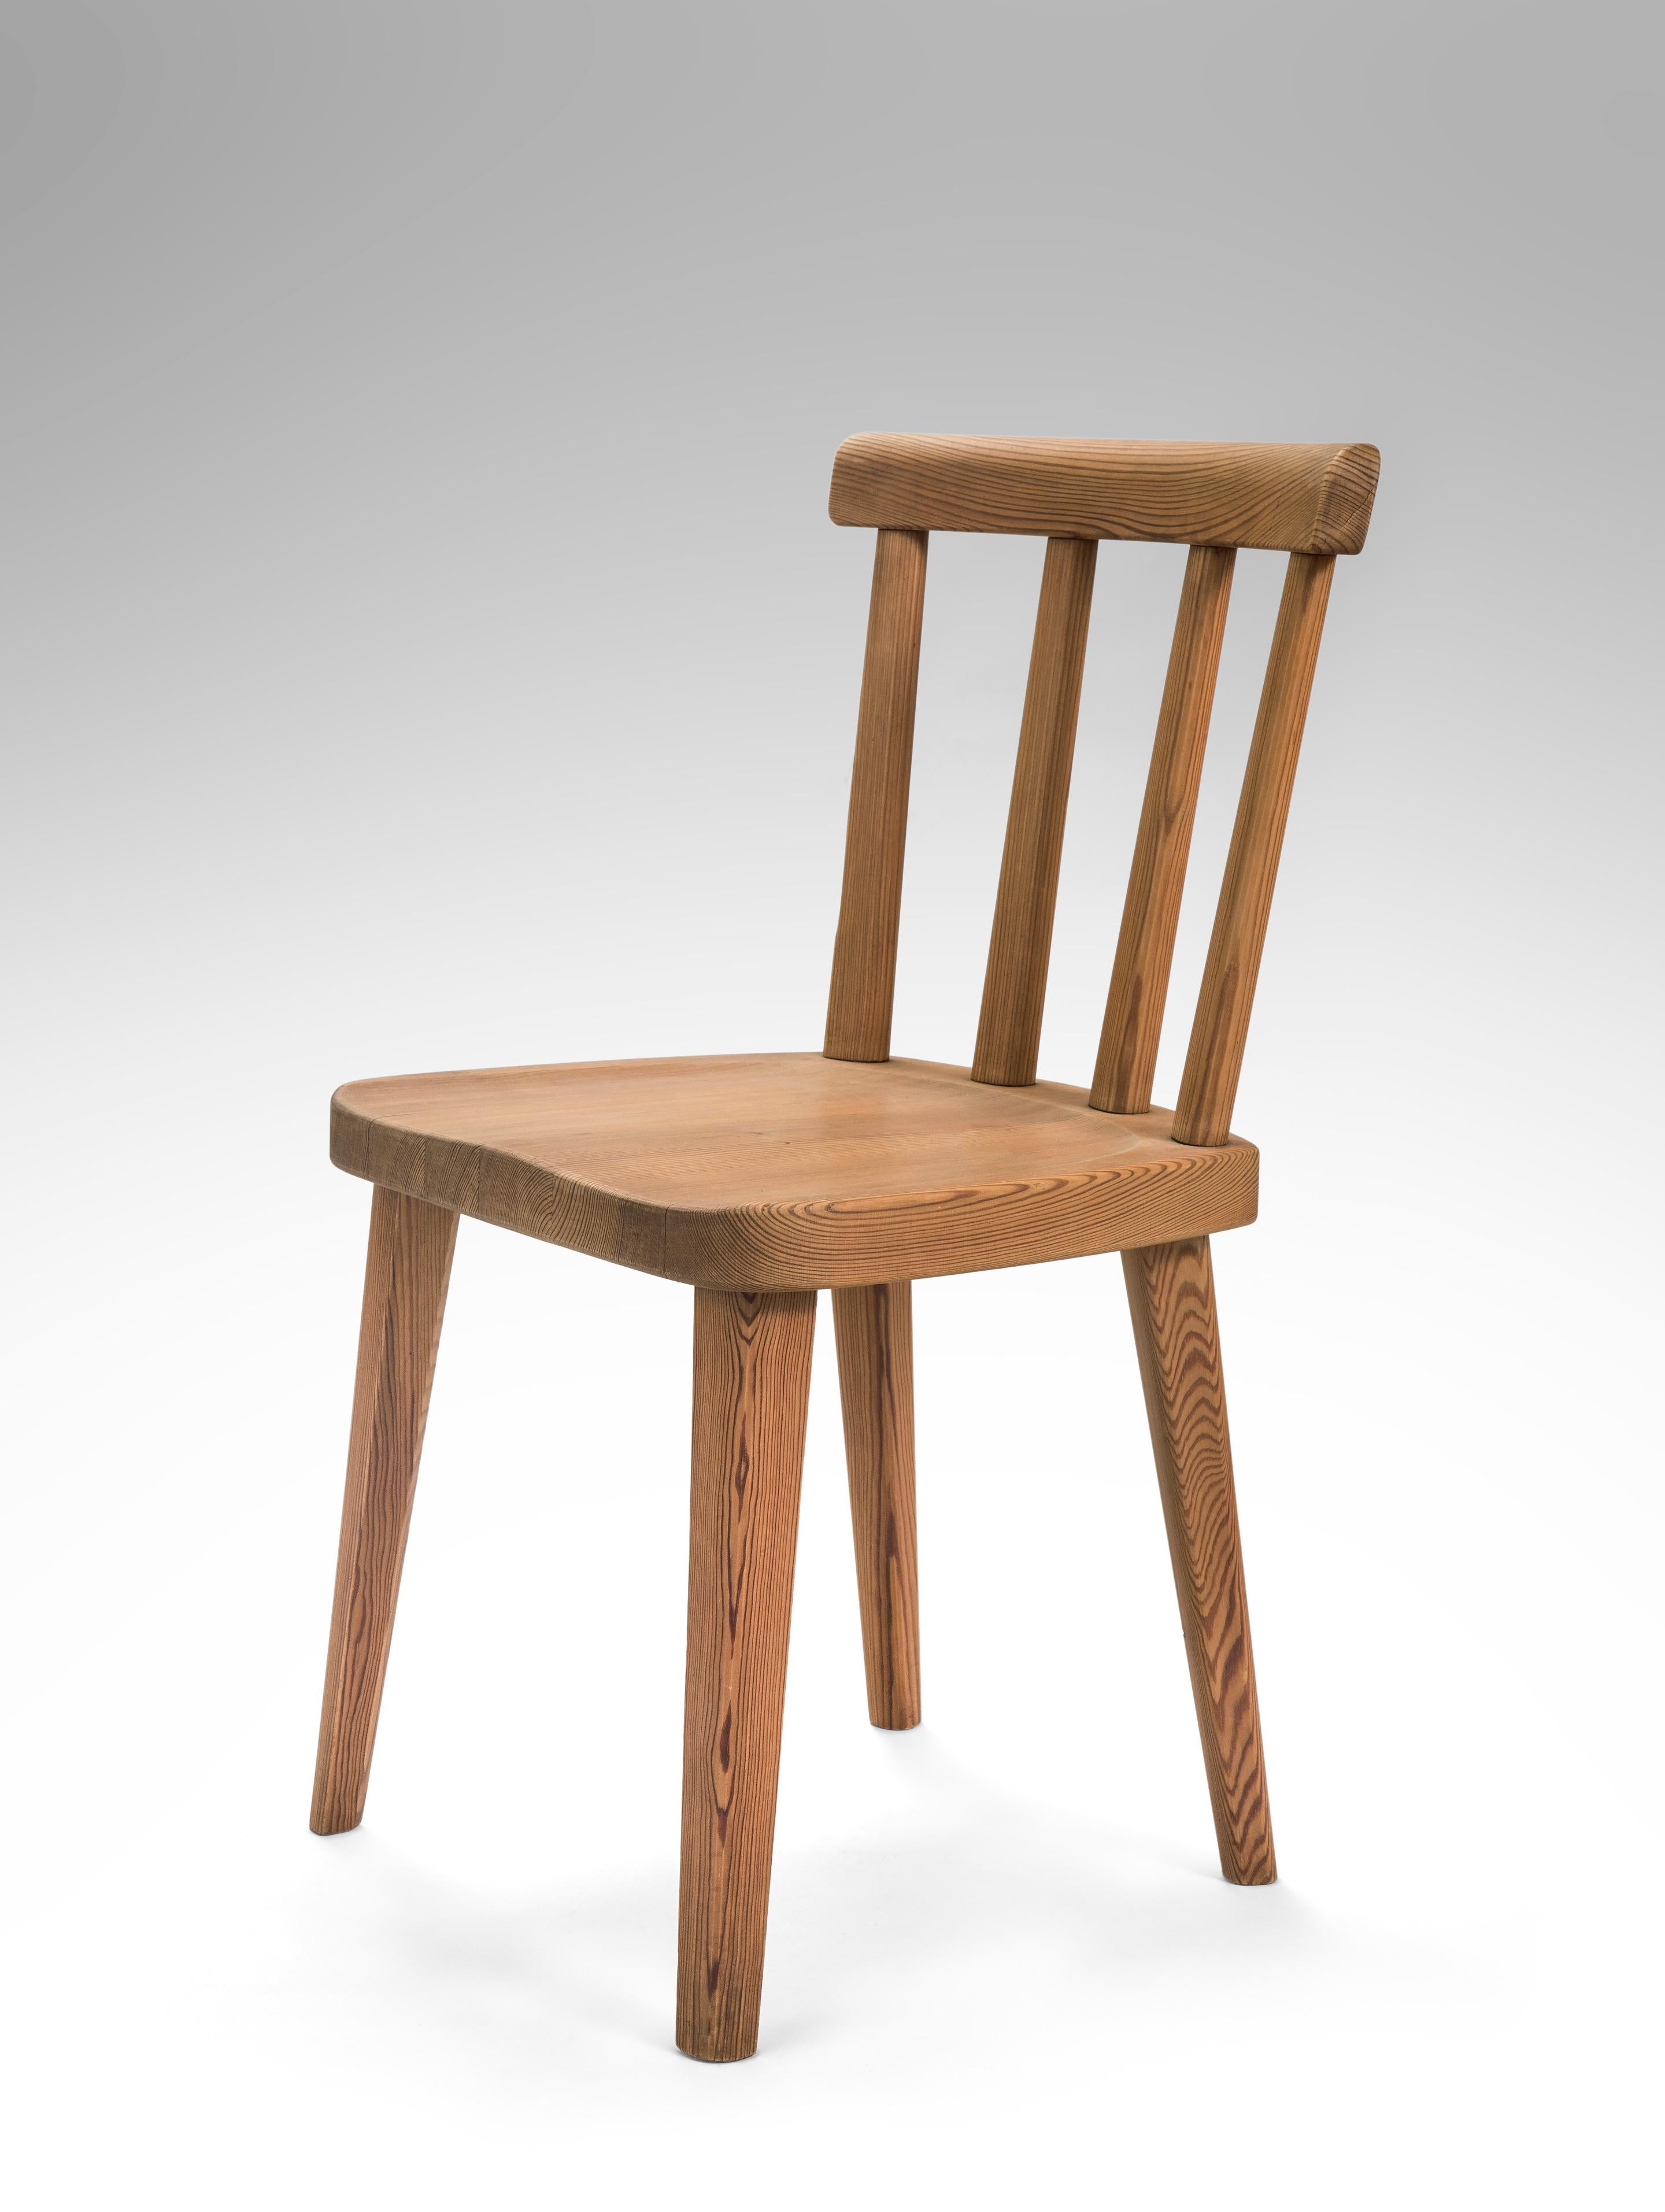 Axel-Einar Hjorth, for Nordiska Kompaniet, 
Set of 4 Uto Solid Pine Chairs
Early 20th century
A straight forward, comfortable and solidly constructed chair. The concave top rail raised on four rounded back splats, above a contoured seat,